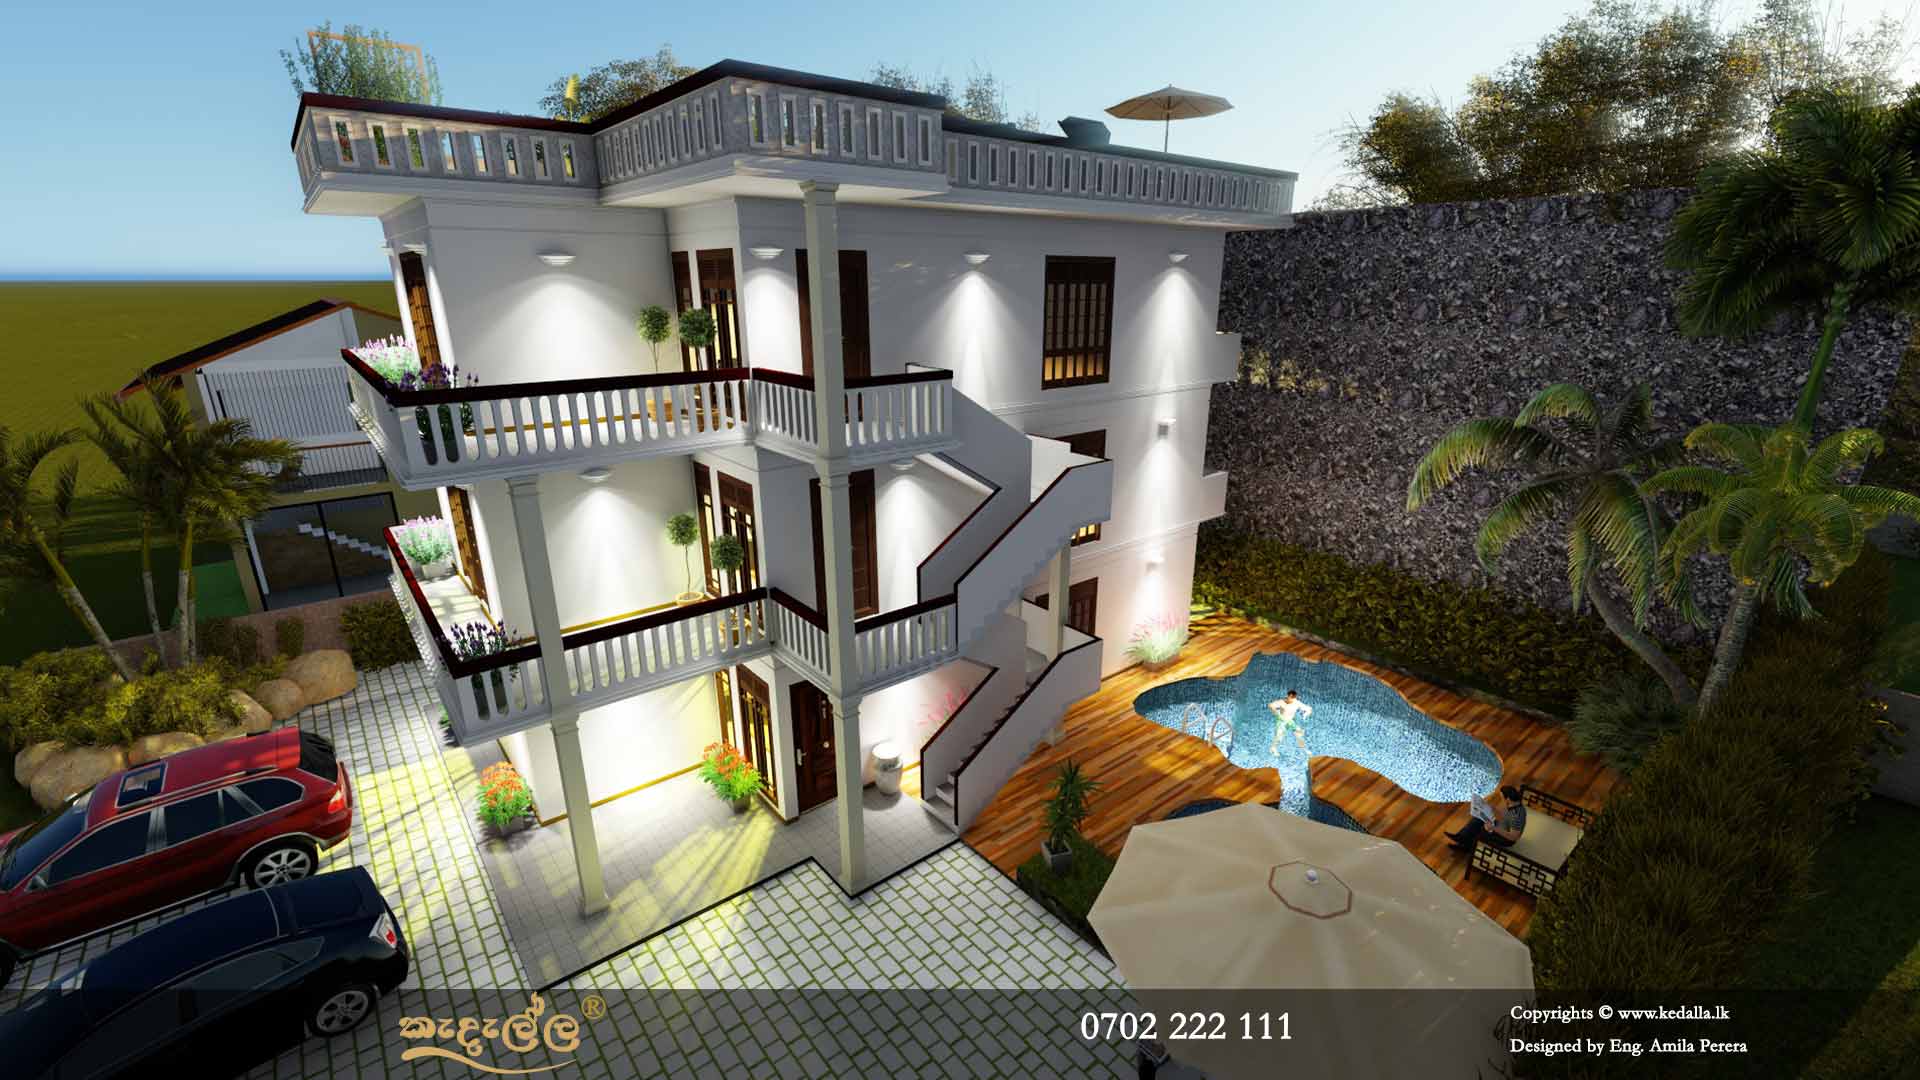 Three Story House Plans in Sri Lanka with curved shape mini swimming pool at ground level